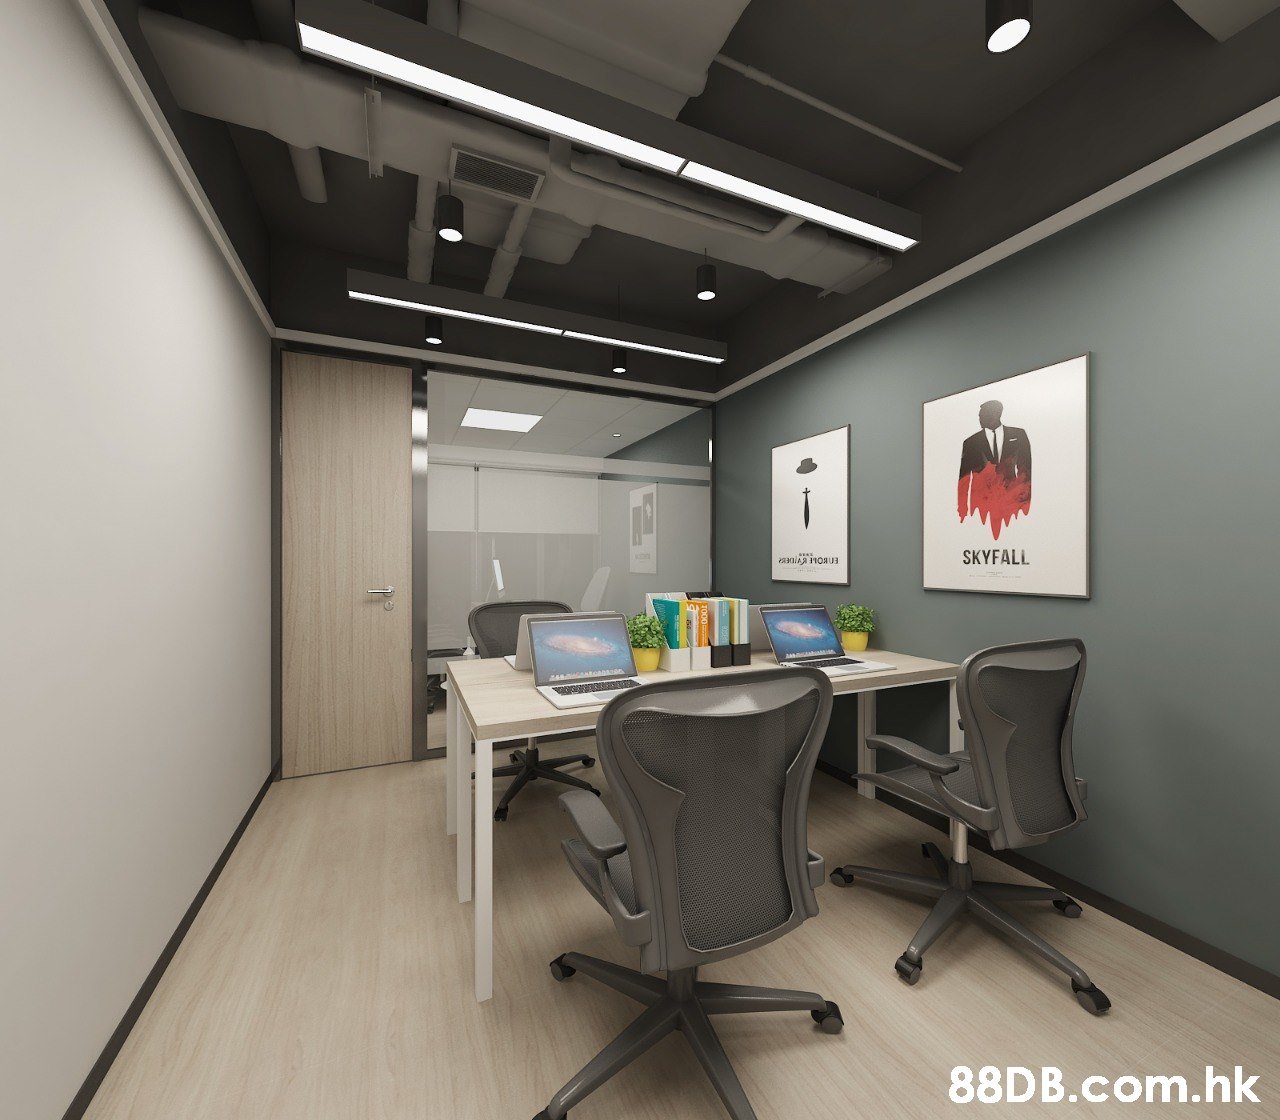 SKYFALL .hk  Office chair,Office,Interior design,Ceiling,Building